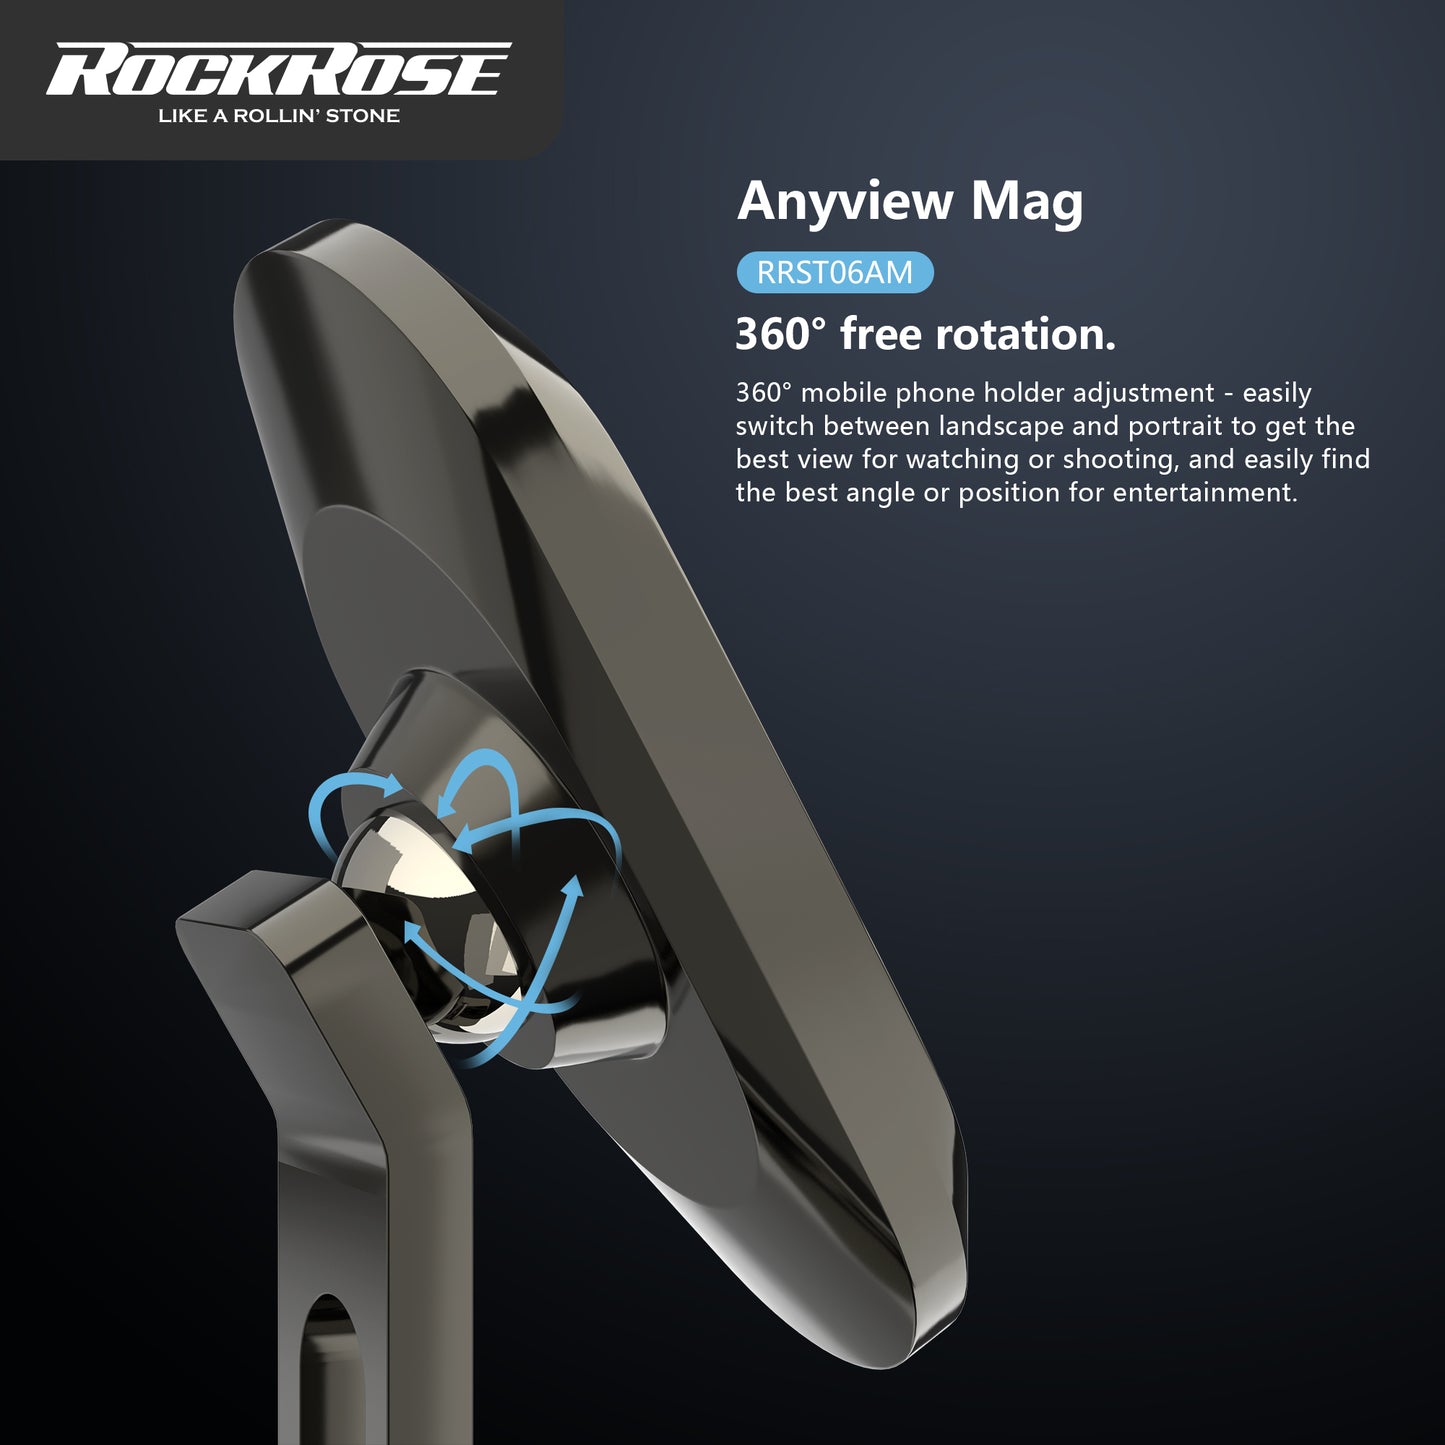 RockRose Anyview Mag Dashboard Mount Magnetic Phone Holder